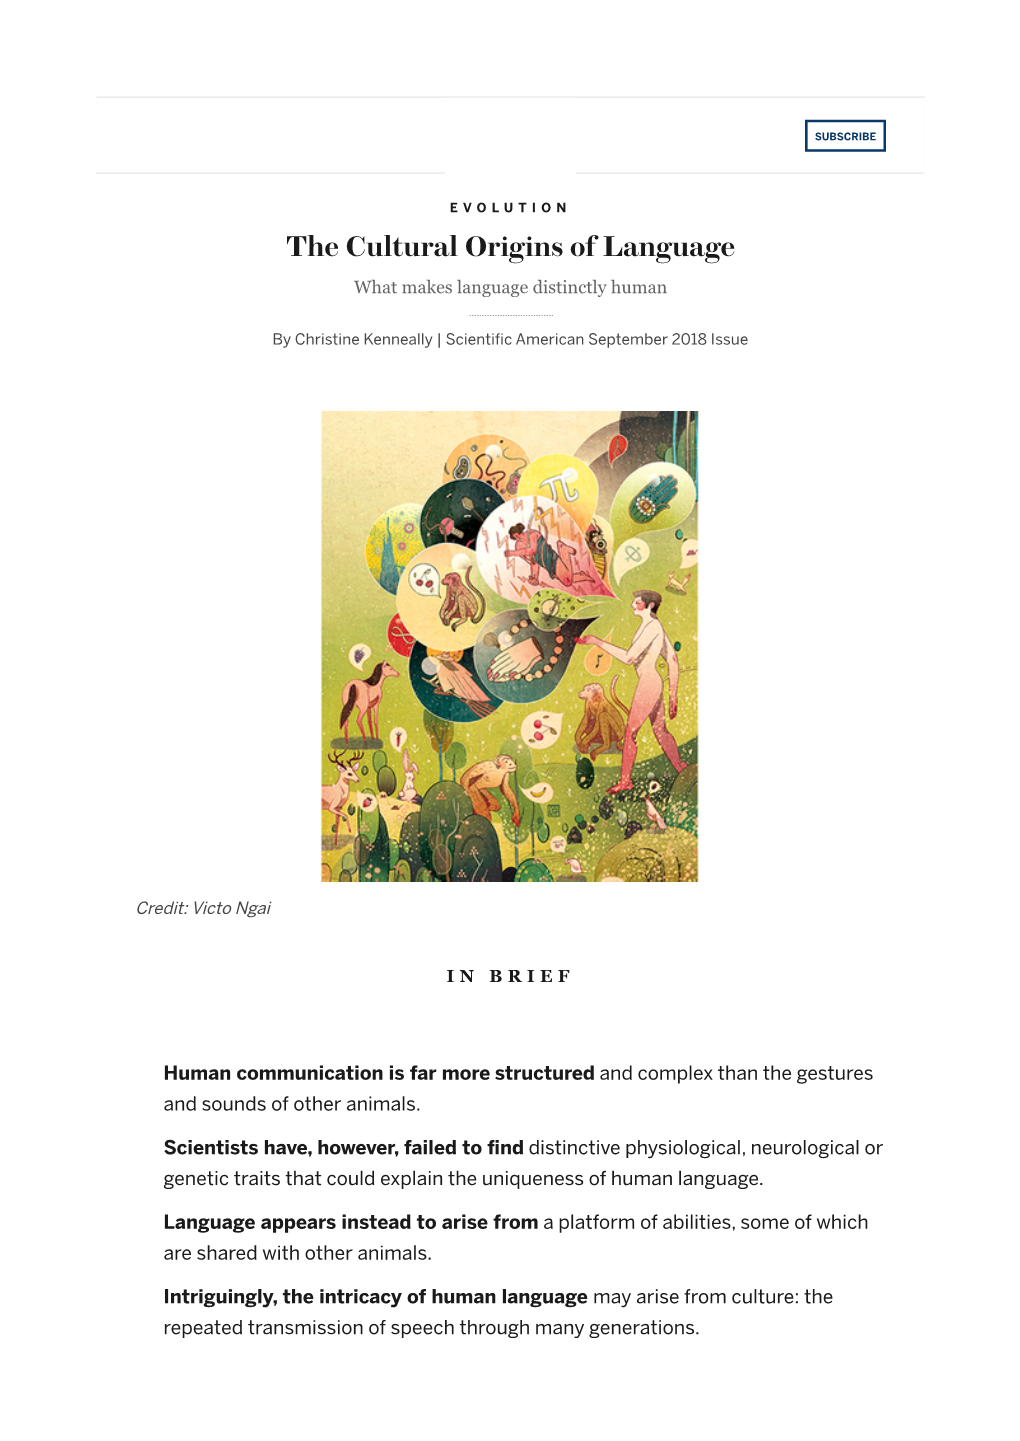 The Cultural Origins of Language What Makes Language Distinctly Human